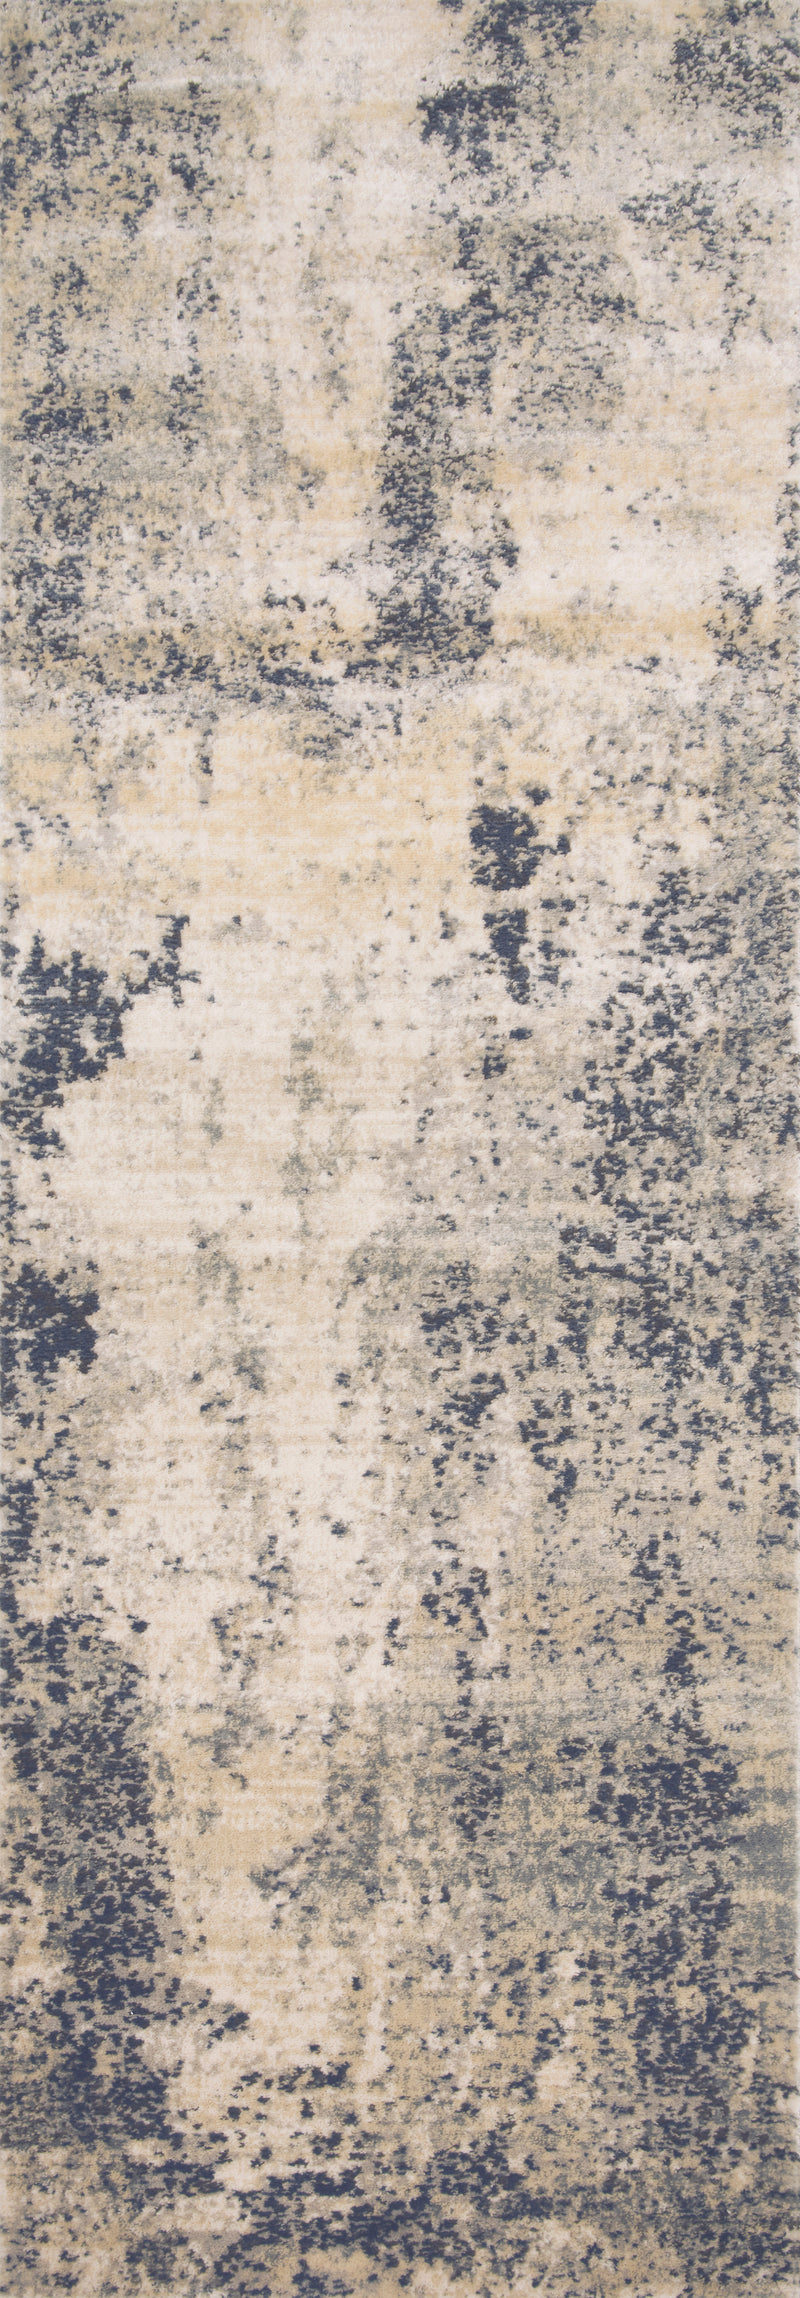 media image for Teagan Rug in Natural / Denim by Loloi II 265